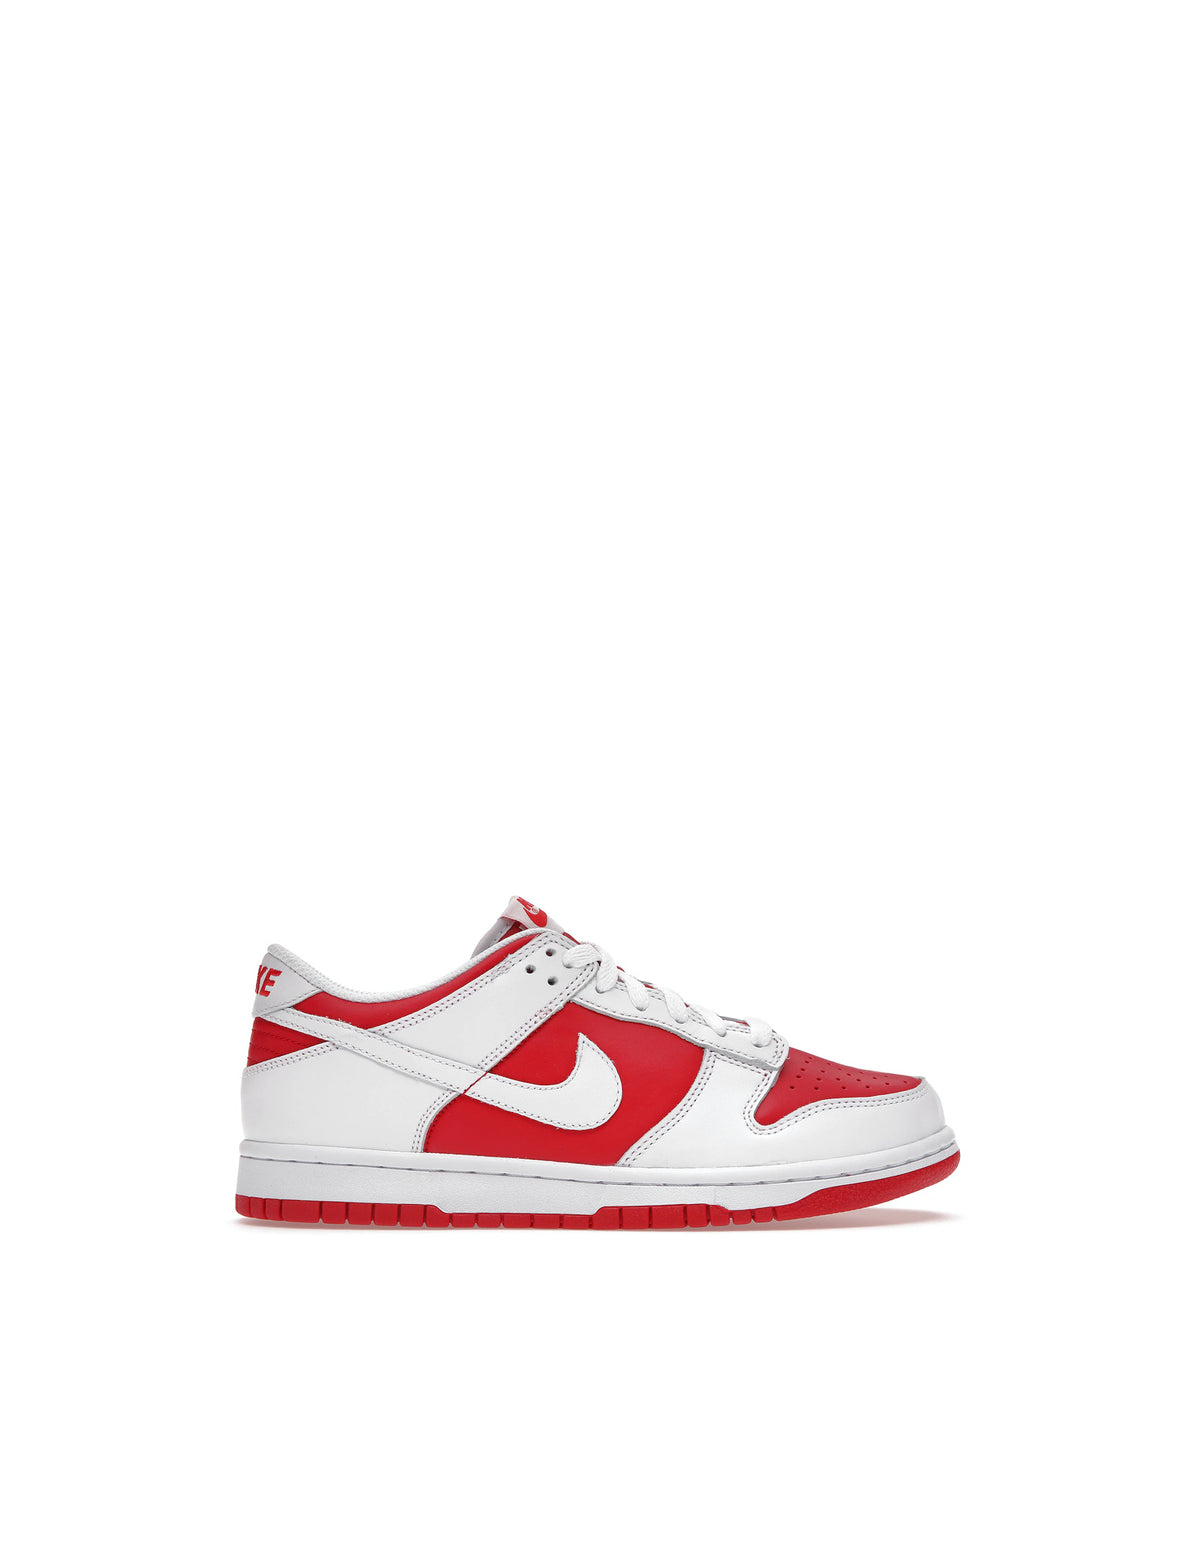 Nike Dunk Low "Championship Red" (2021) (GS)